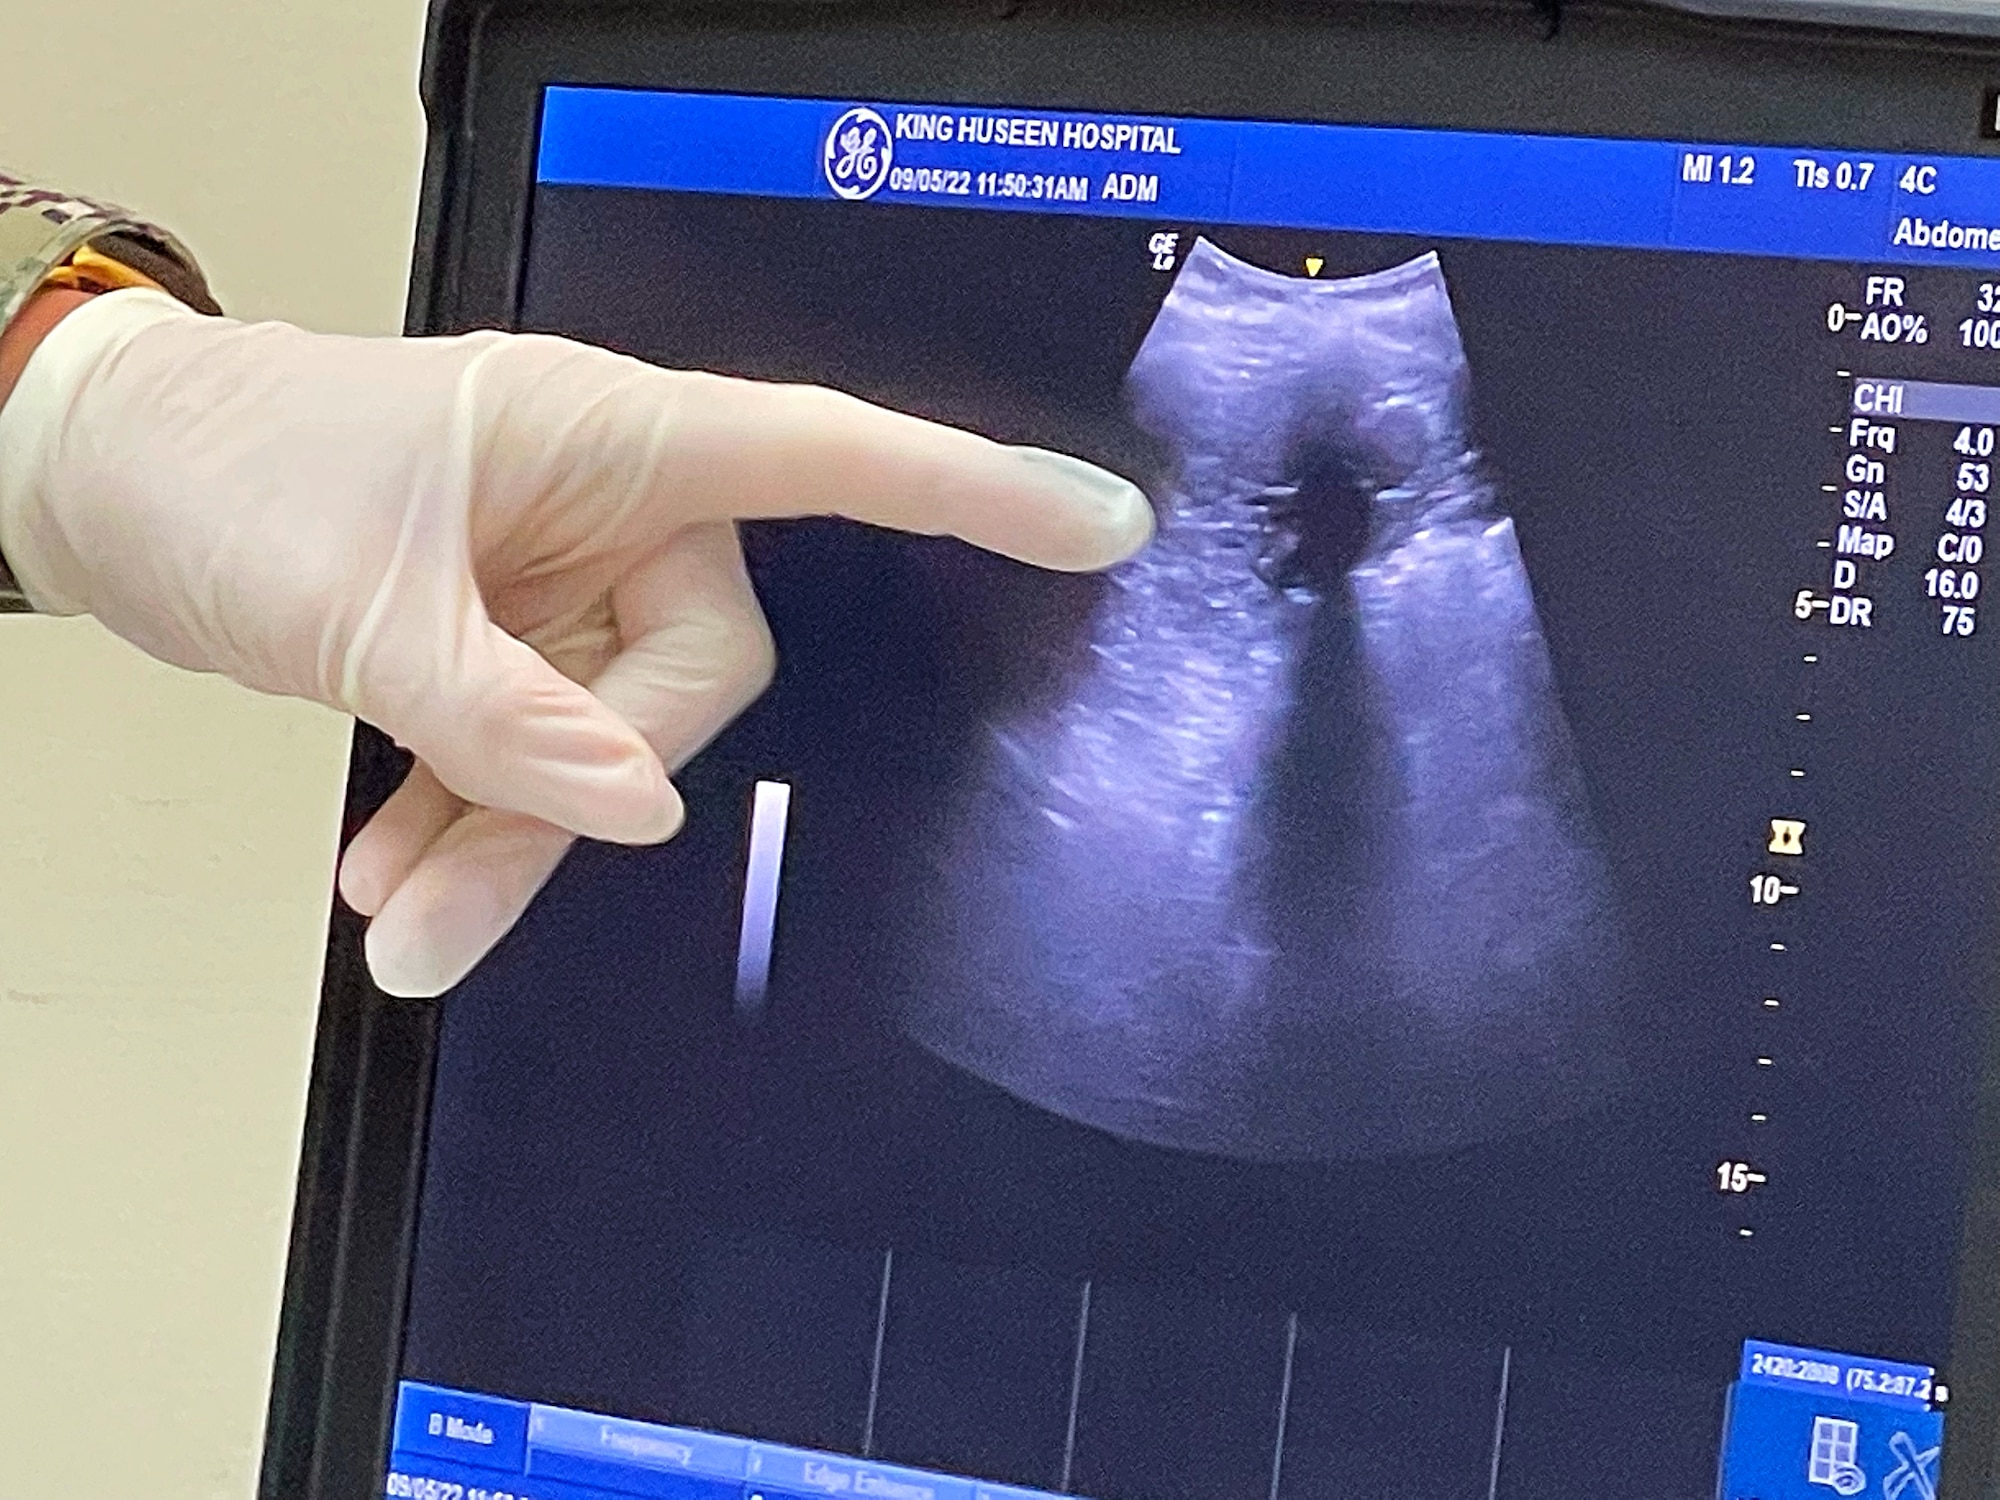 Lt. Cmdr. Taylor DesRosiers, Walter Reed Medical Center critical care fellow, points to a structure on an ultrasound machine screen while providing a demonstration of various techniques inside the King Hussein Medical Center May 9, 2022 in Amman, Jordan.